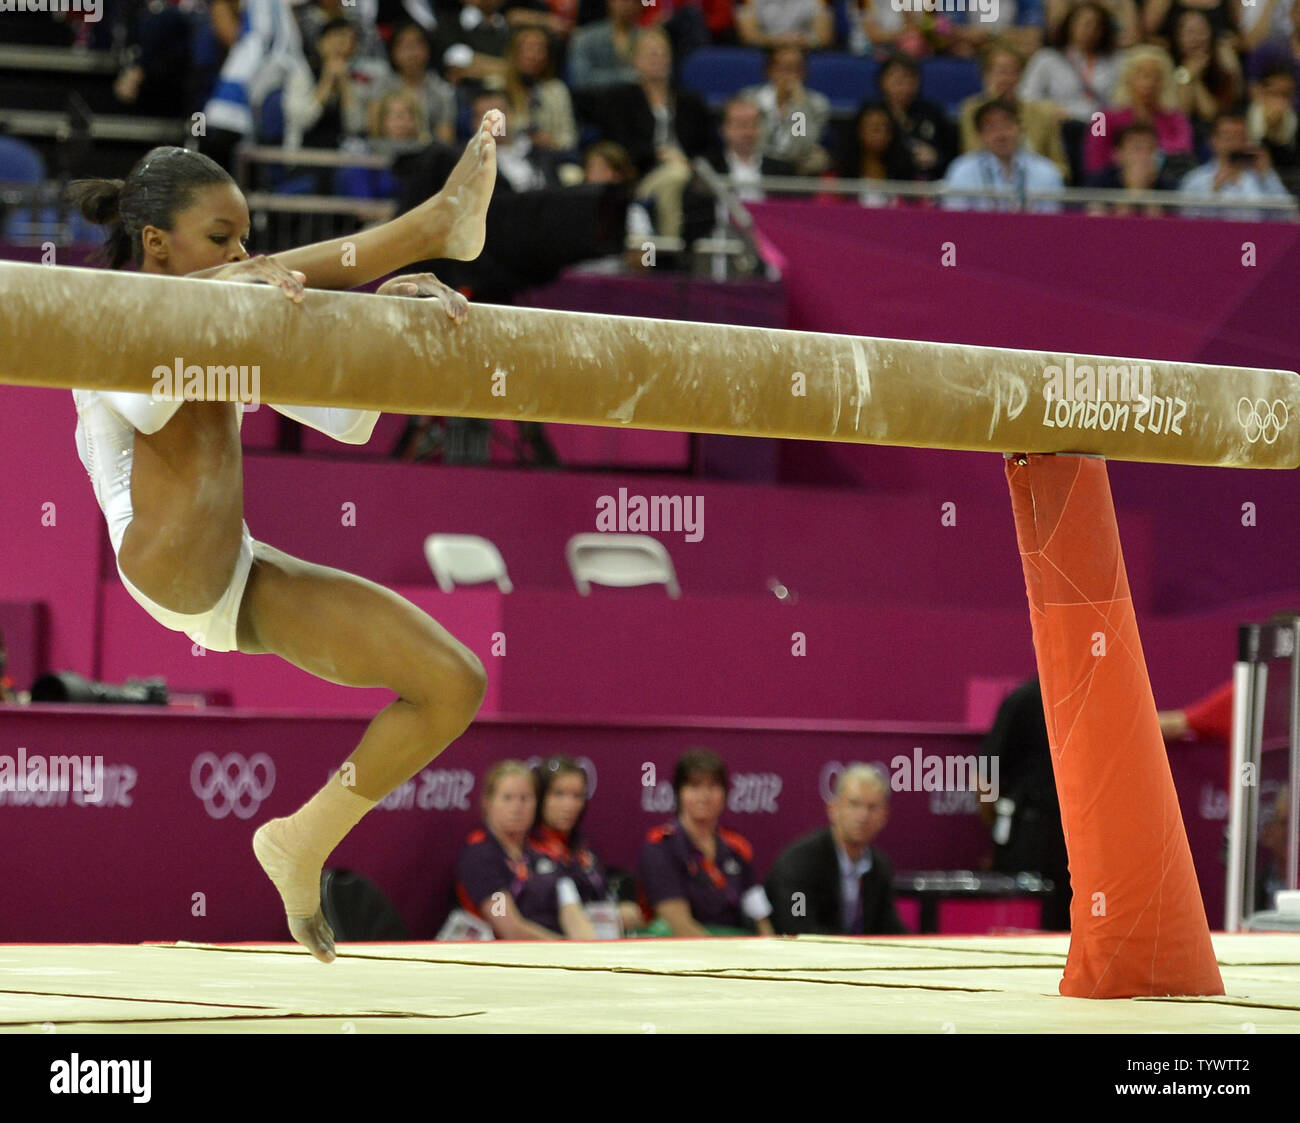 American gymnast Gabrielle Douglas slips and has to grasp the balance beam  as she fell during her routine at the Apparatus Finals at the Greenwich  North Arena at the 2012 Summer Olympics,